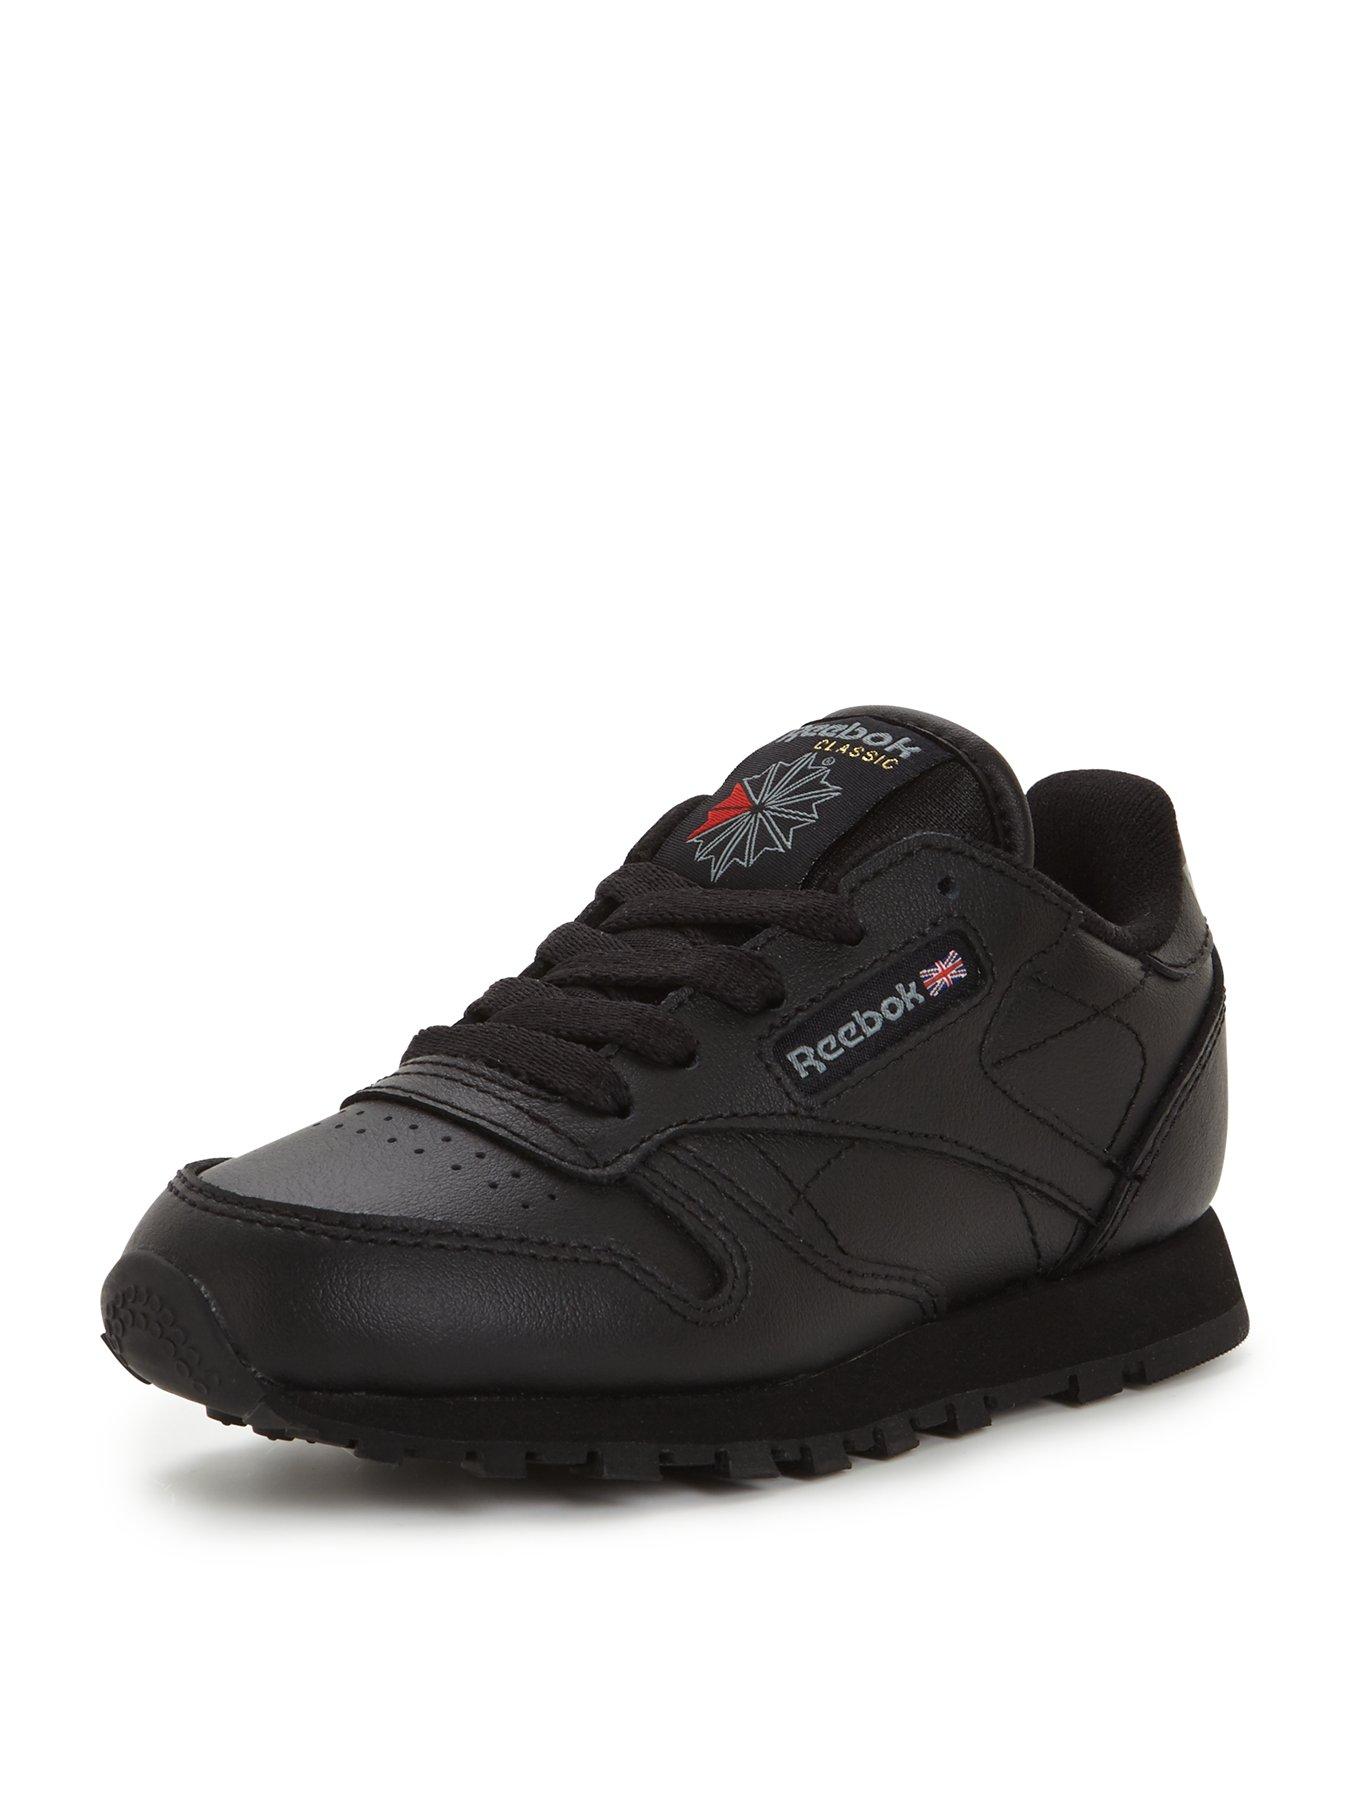 littlewoods kids trainers